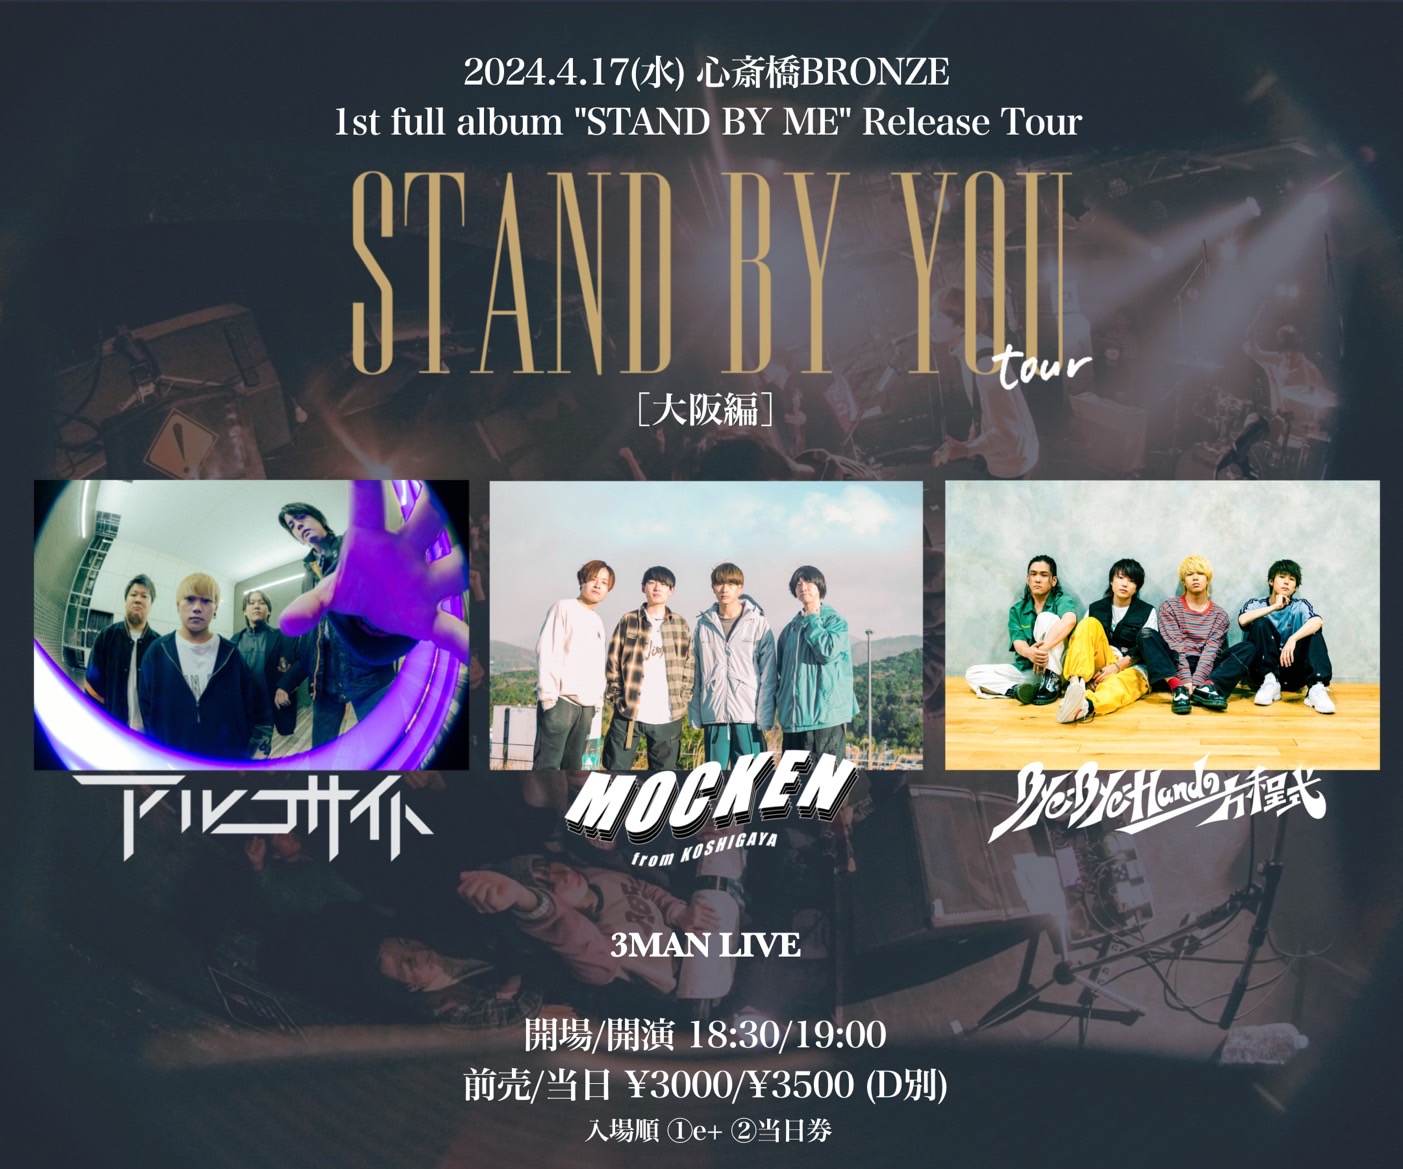 MOCKEN 1st full album “STAND BY ME” Release Tour ［STAND BY YOU tour］大阪編